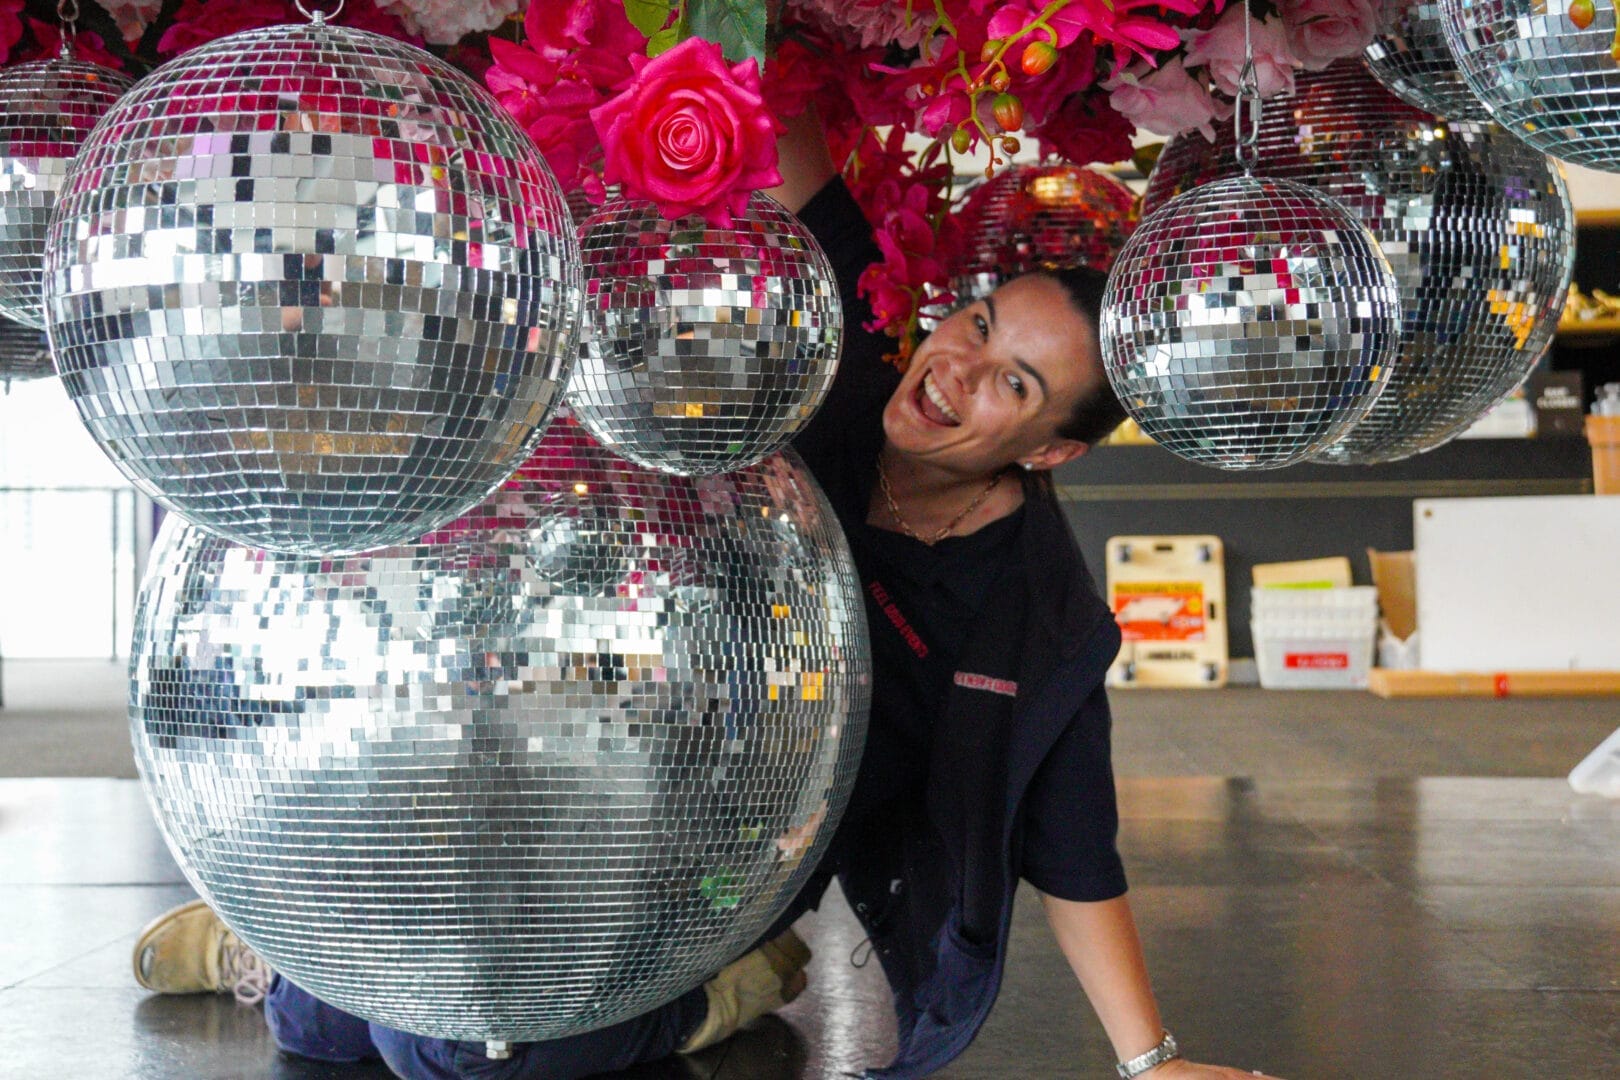 Emma setting up a pink floral and sliver mirror ball ceiling installation